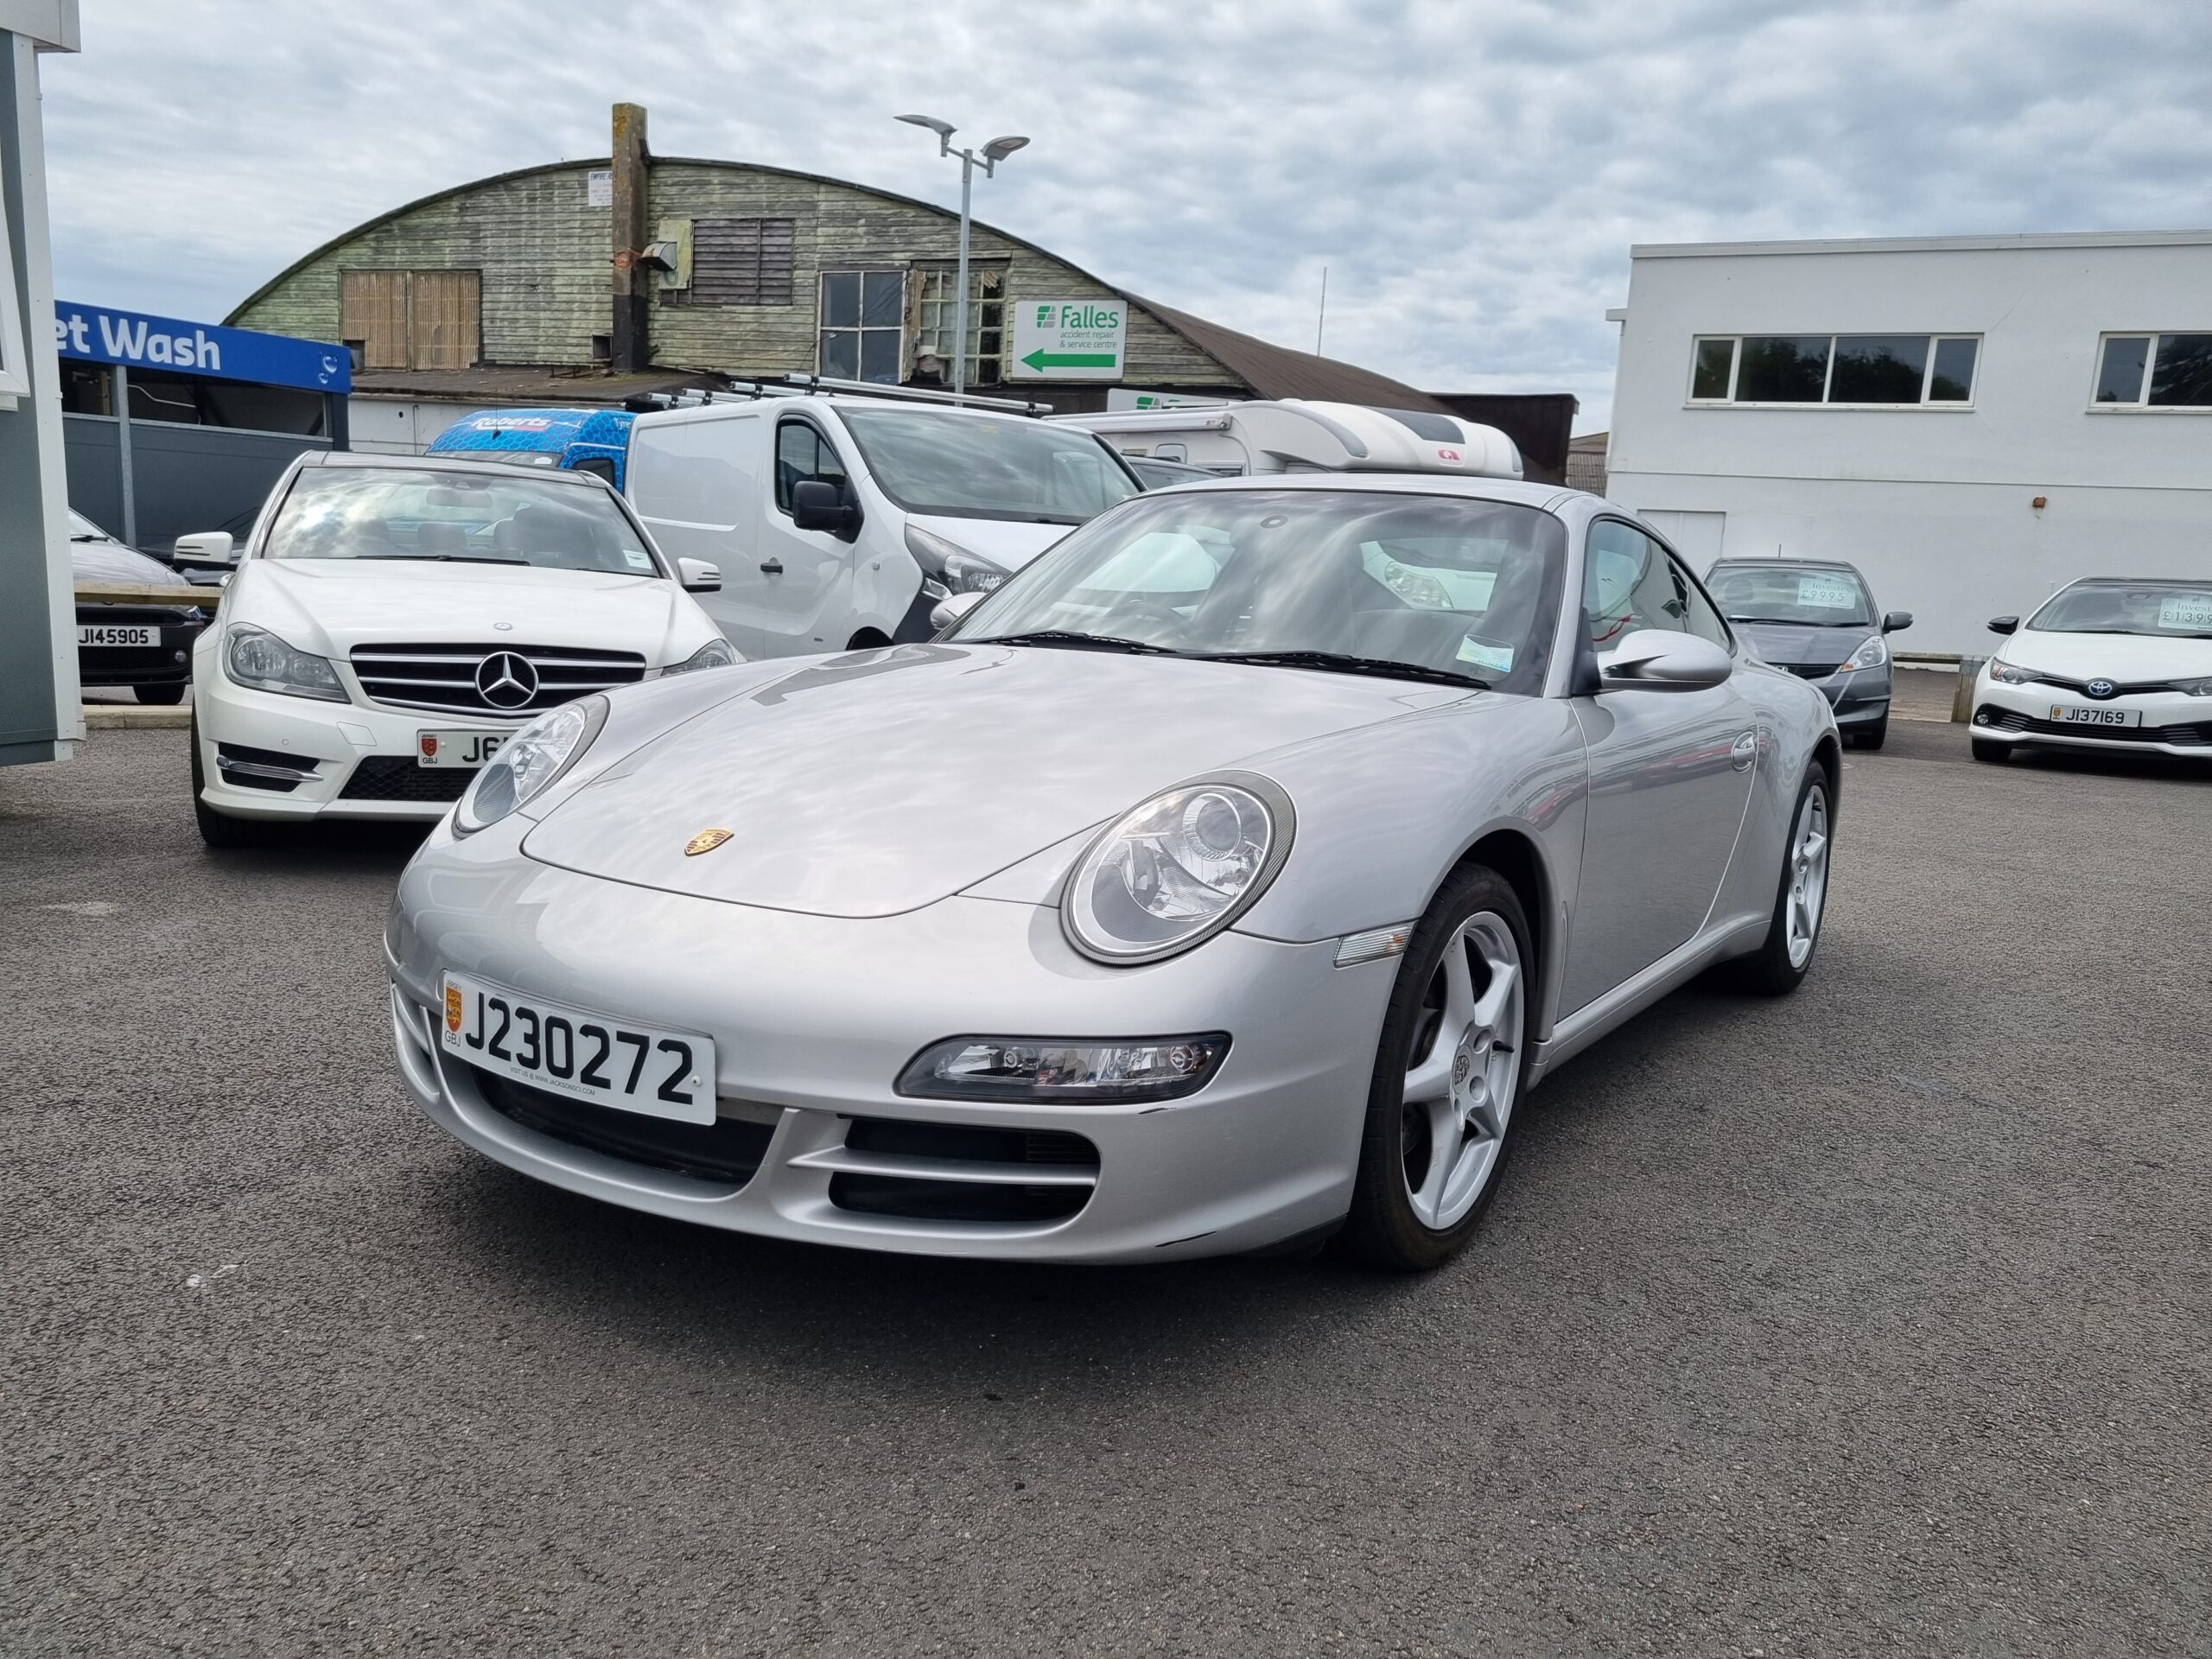 2007 Porsche 911 36 Rwd Carrera Manual Coupe Switchable Exhaustnavigationfull Service History 11